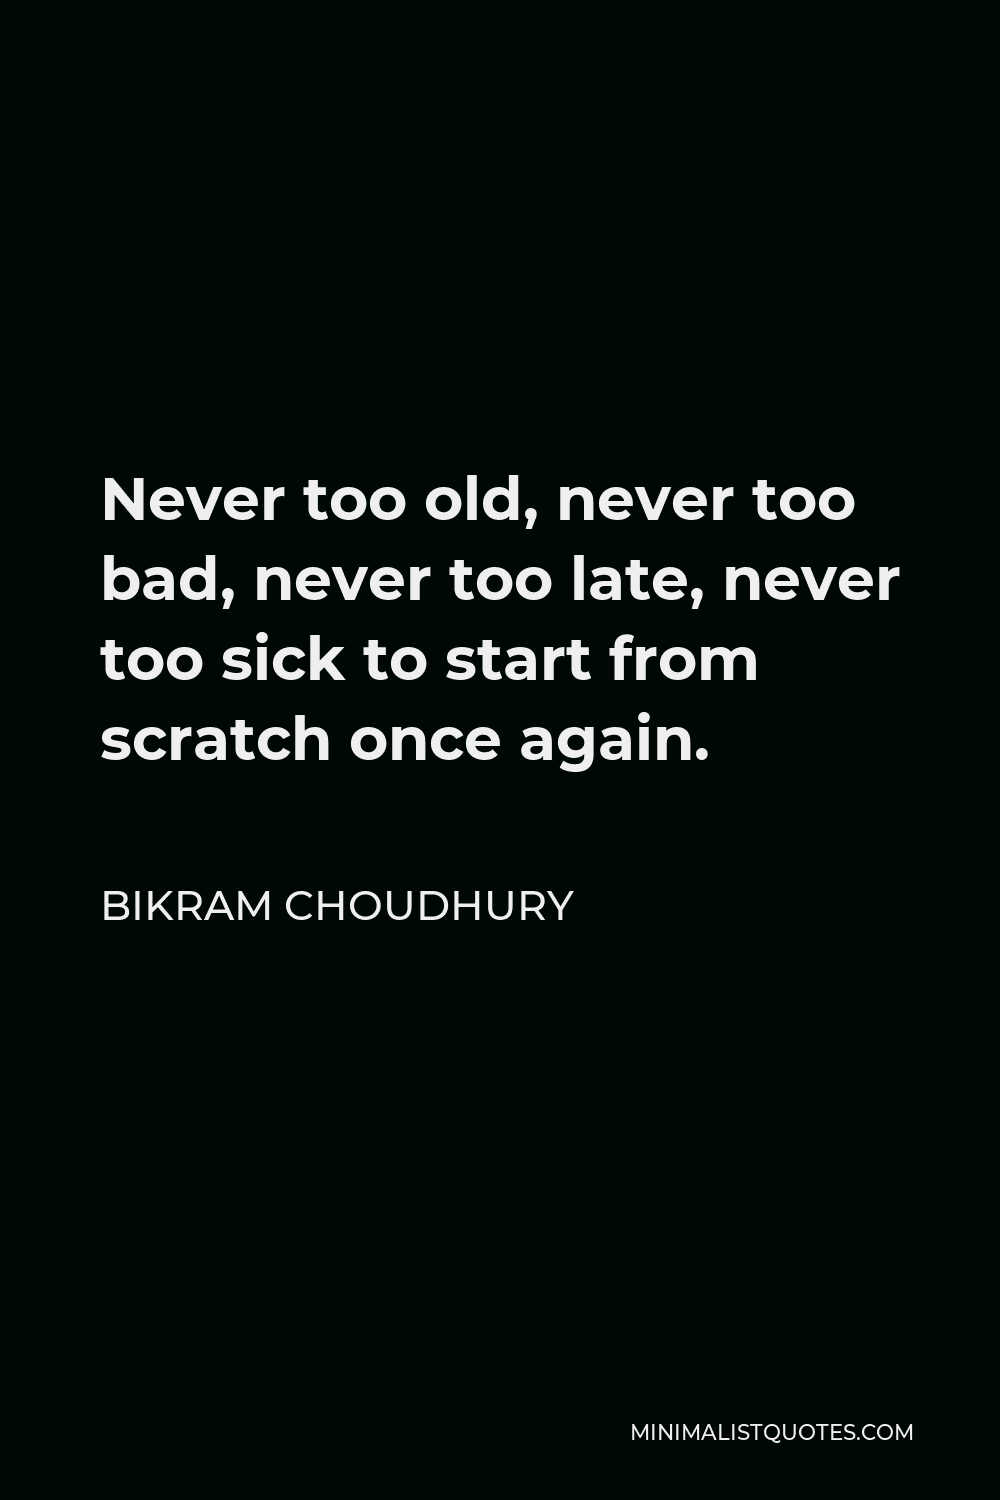 Bikram Choudhury Quote - Never too old, never too bad, never too late, never too sick to start from scratch once again.